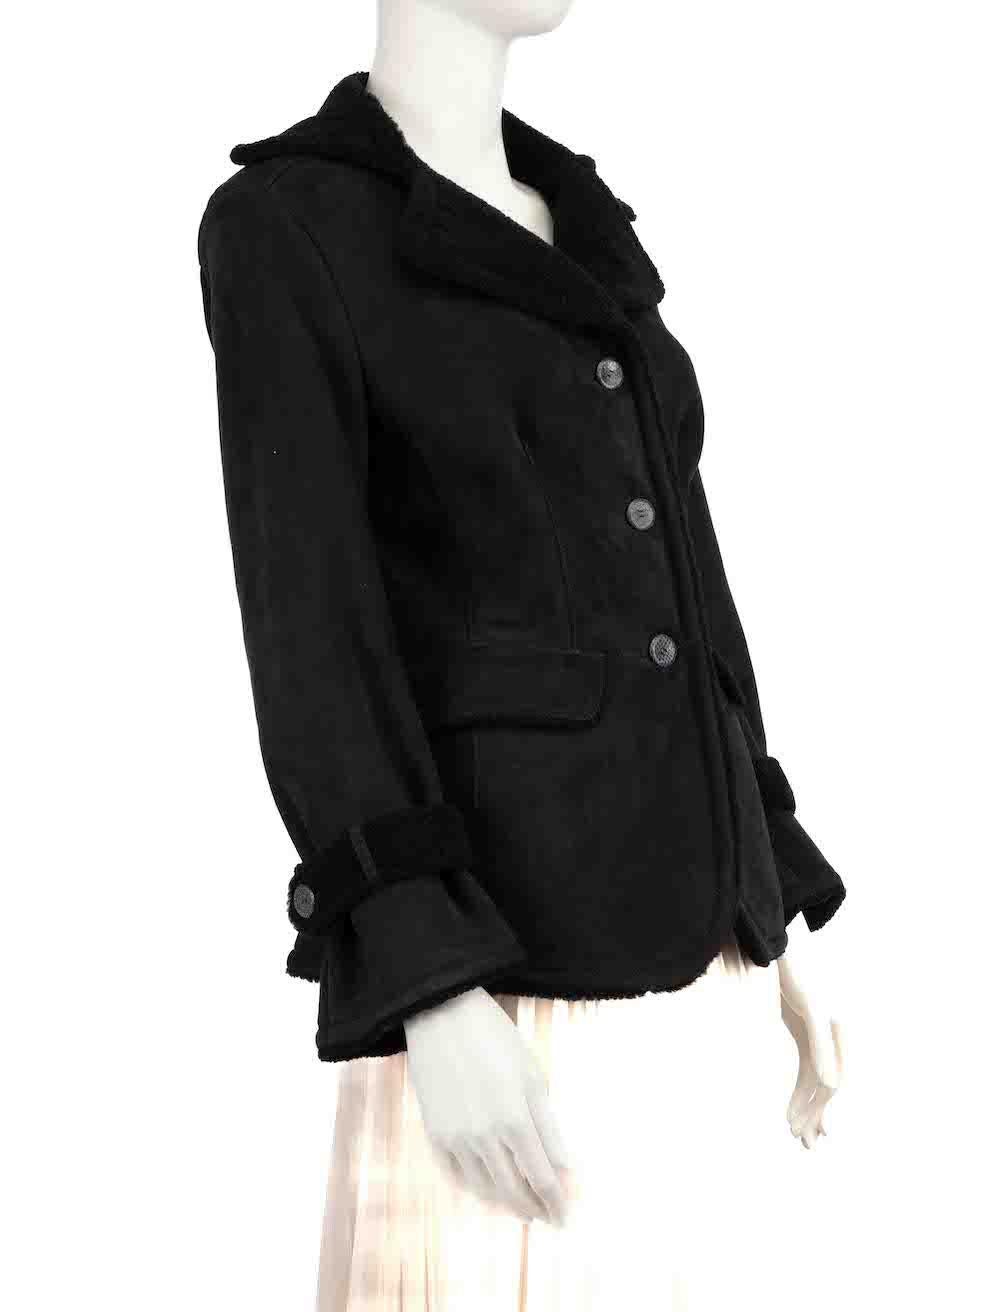 CONDITION is Very good. Hardly any visible wear to coat is evident on this used Malo designer resale item.
 
 
 
 Details
 
 
 Black
 
 Suede
 
 Mid Length coat
 
 Single breasted
 
 2x Front side pockets with flaps
 
 Adjustable button strap cuffs
